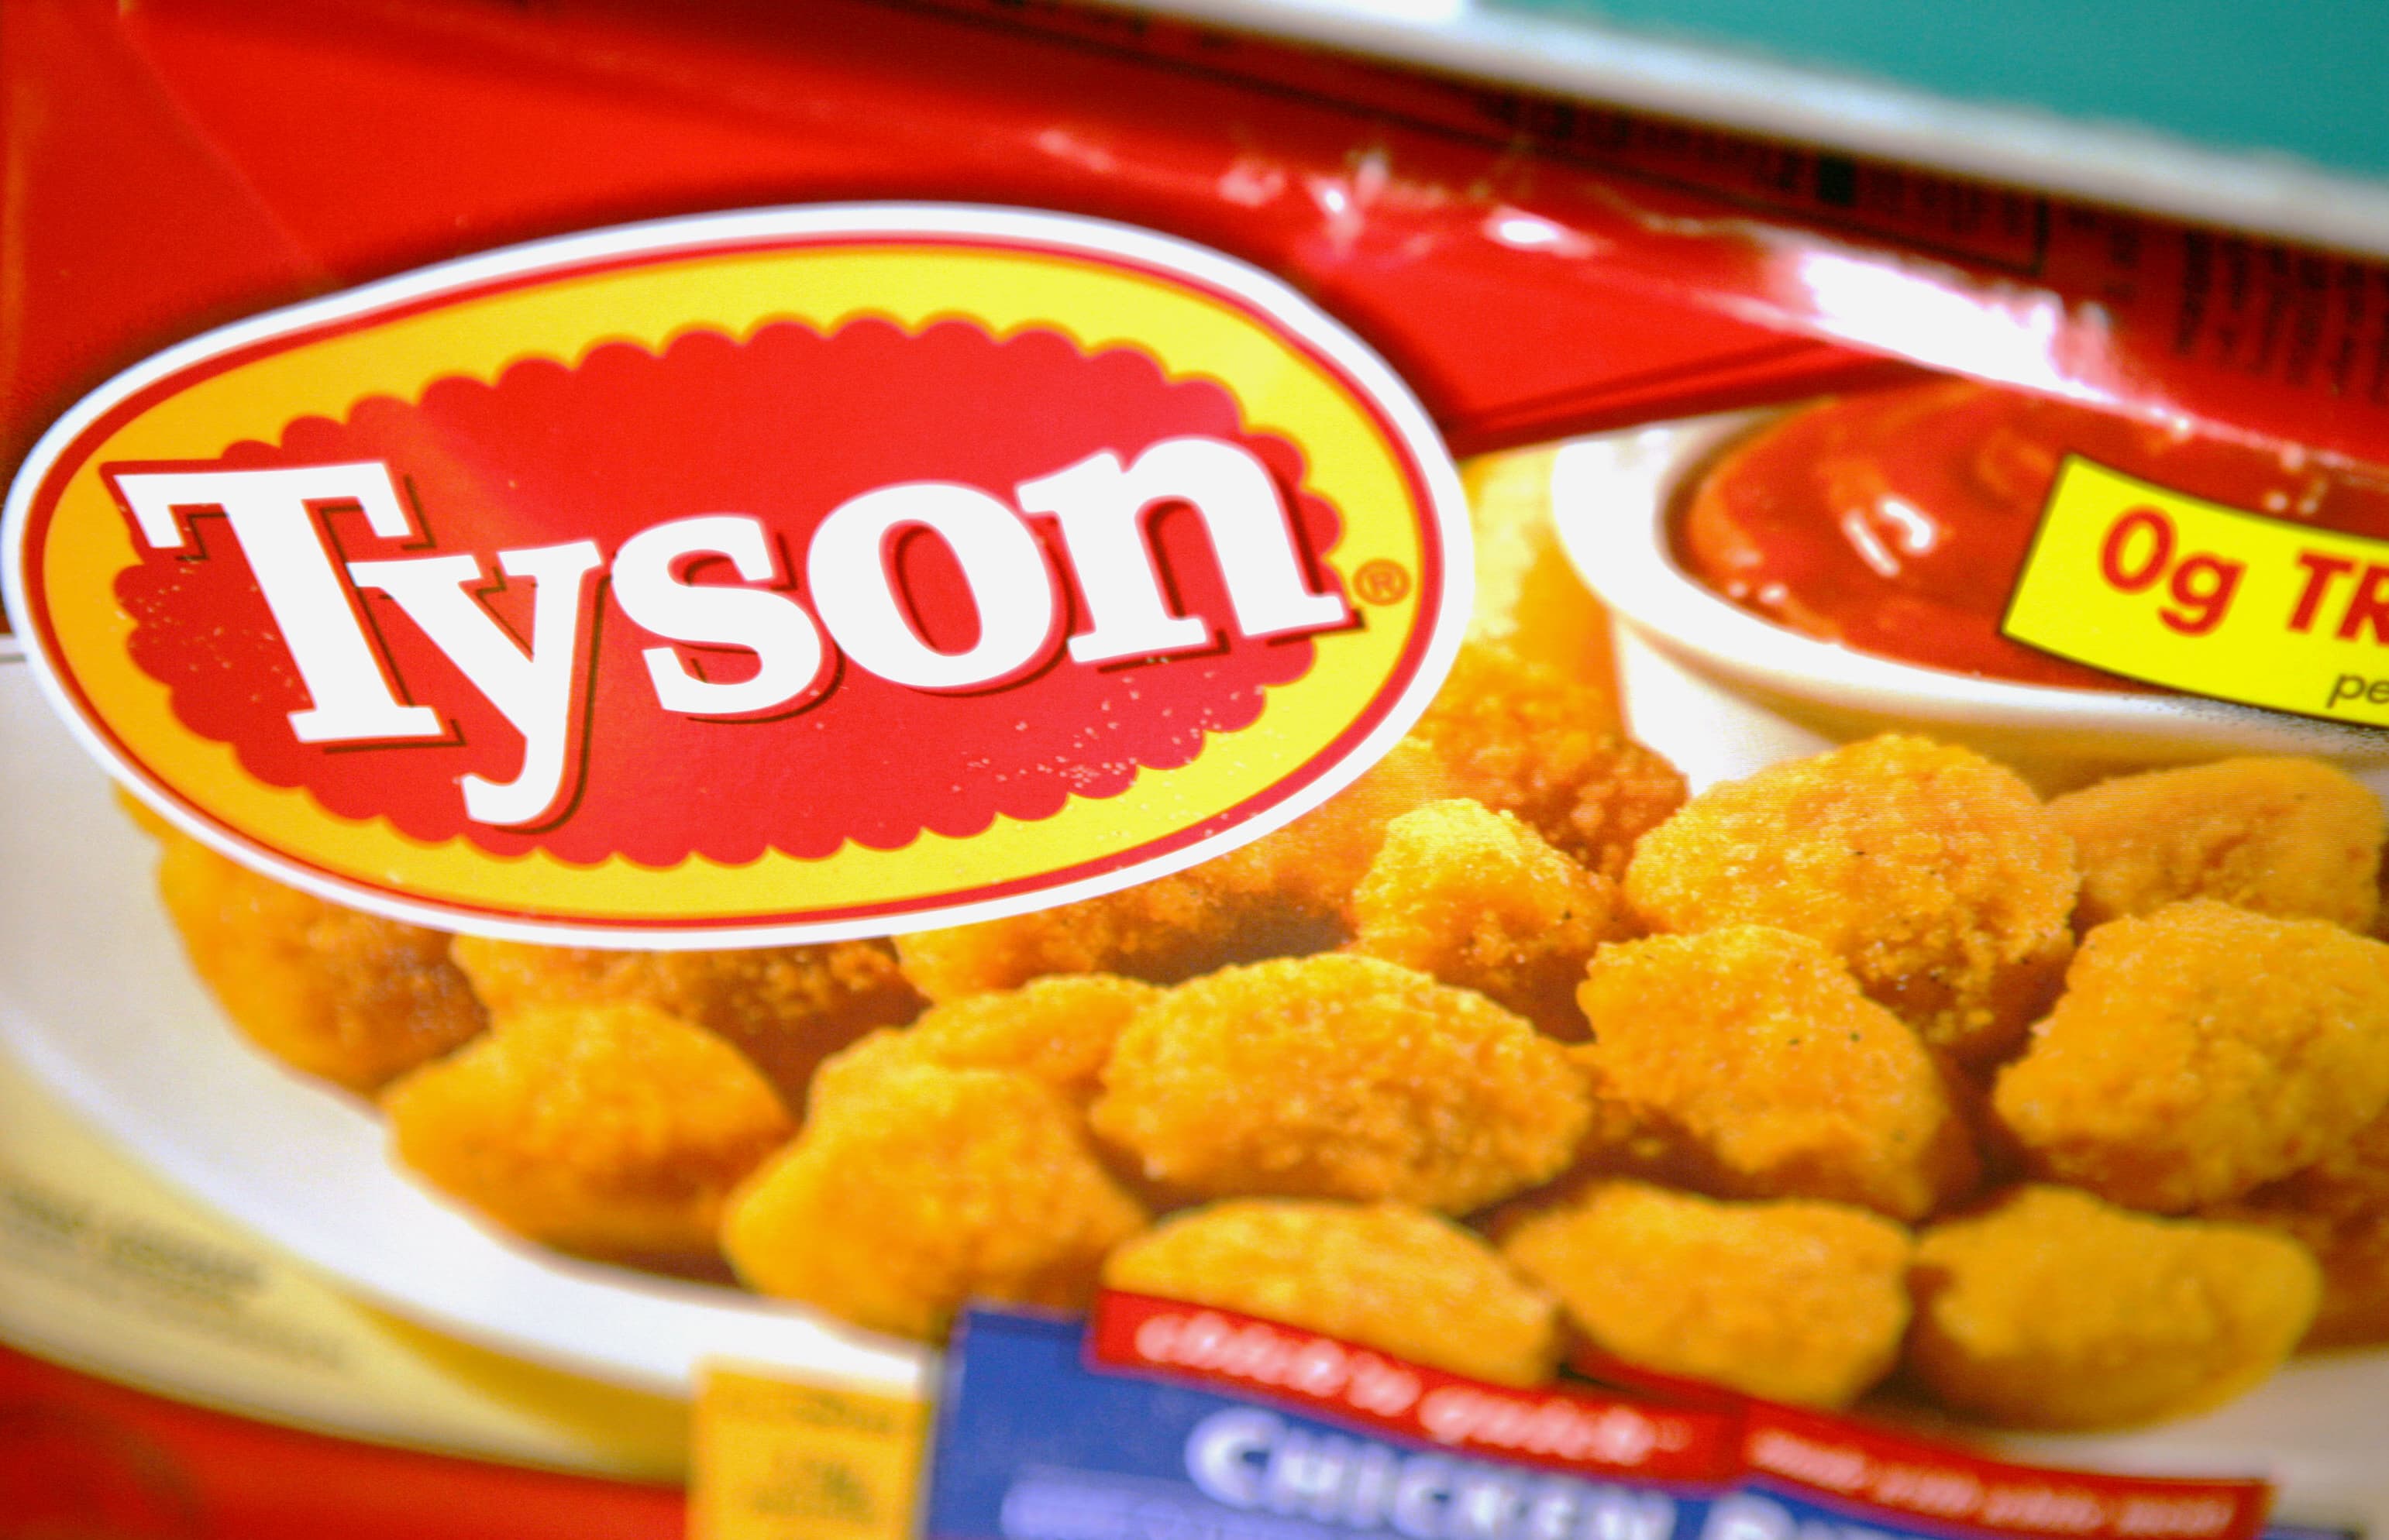 Goldman Sachs downgrades Tyson Foods, says poultry stock's trajectory uncertain after latest earnings